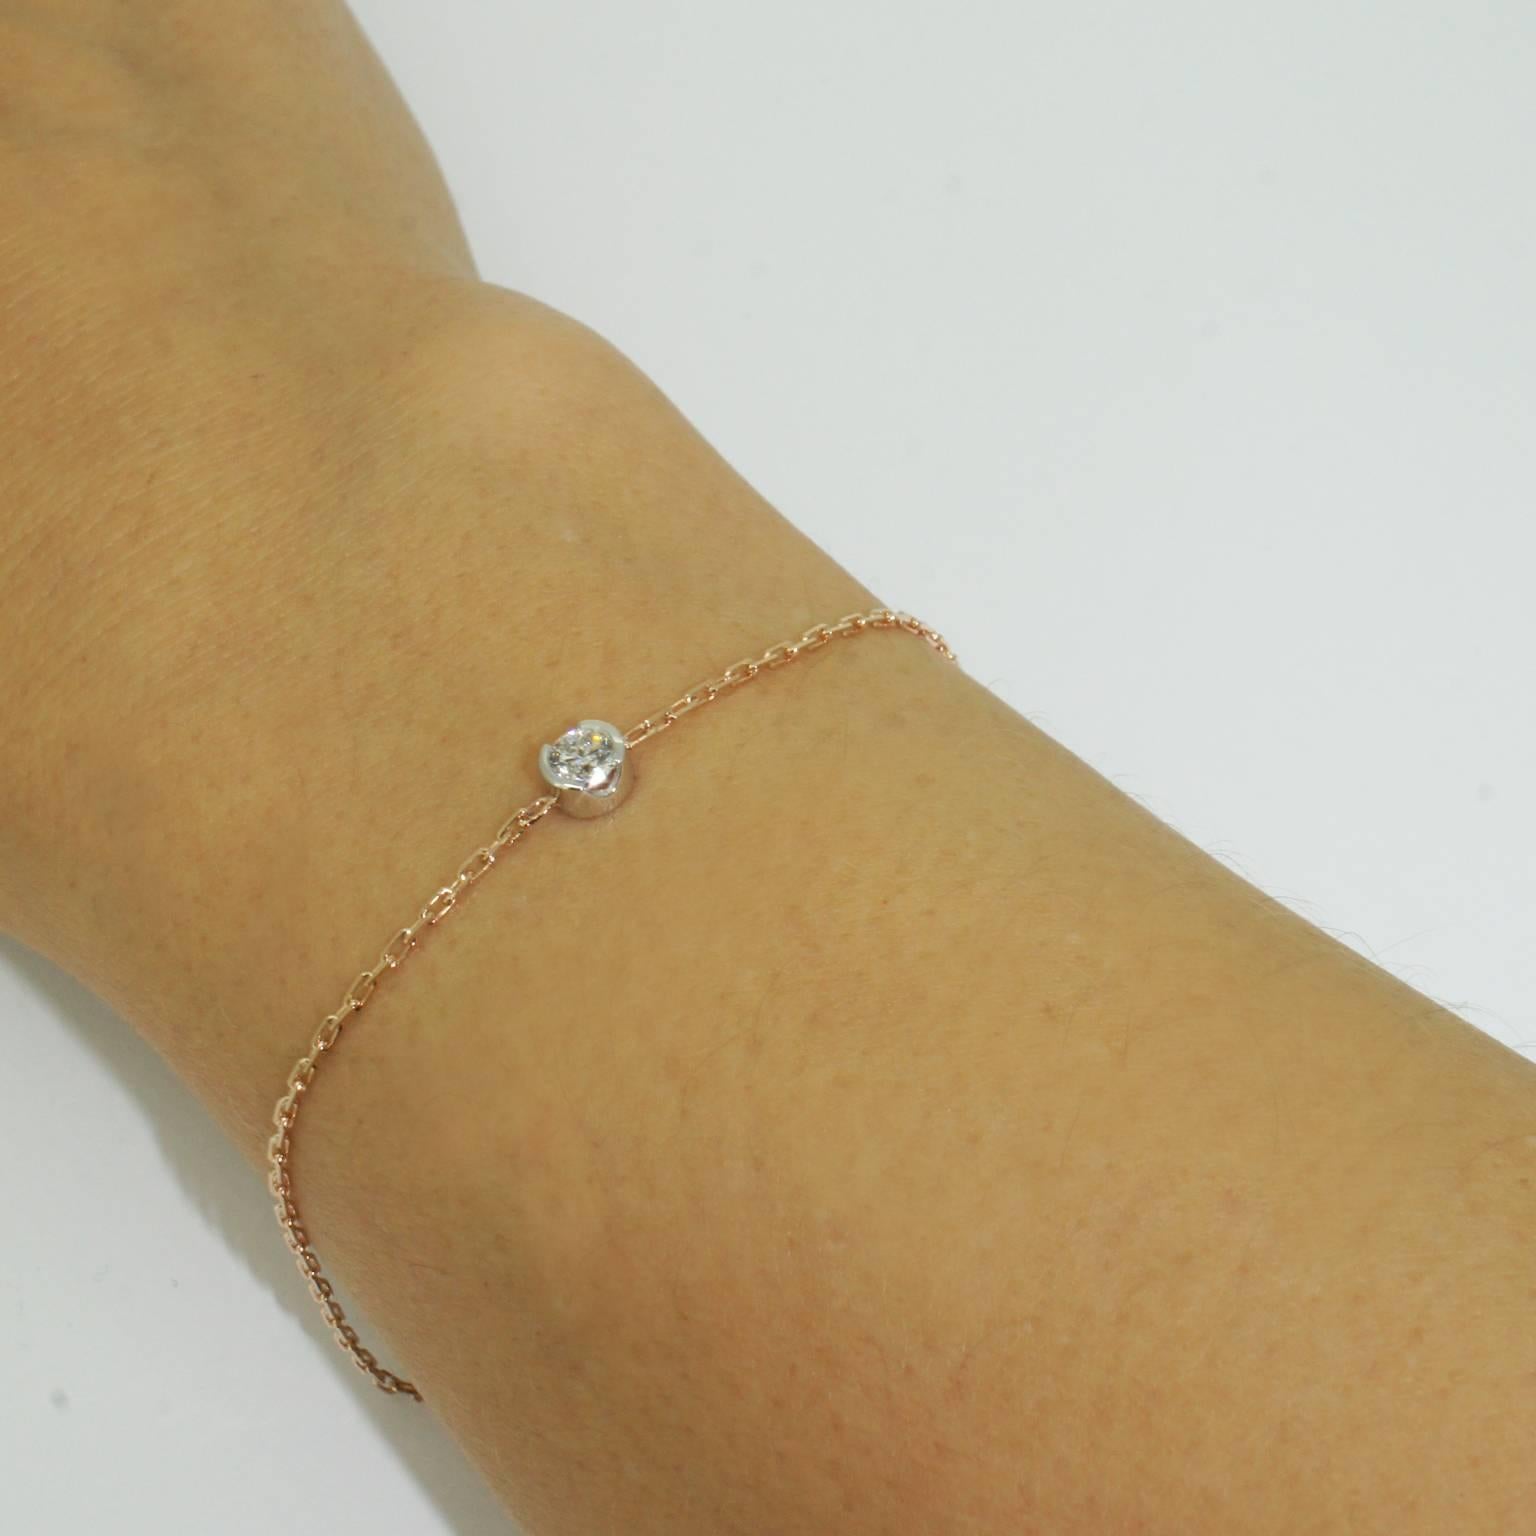 A timeless, simple design, this feminine bracelet features a sparkling round brilliant cut diamond in an 18 karat white gold setting, on an 18 karat rose gold chain. The diamond's setting is open on the sides allowing plenty of light in and adding